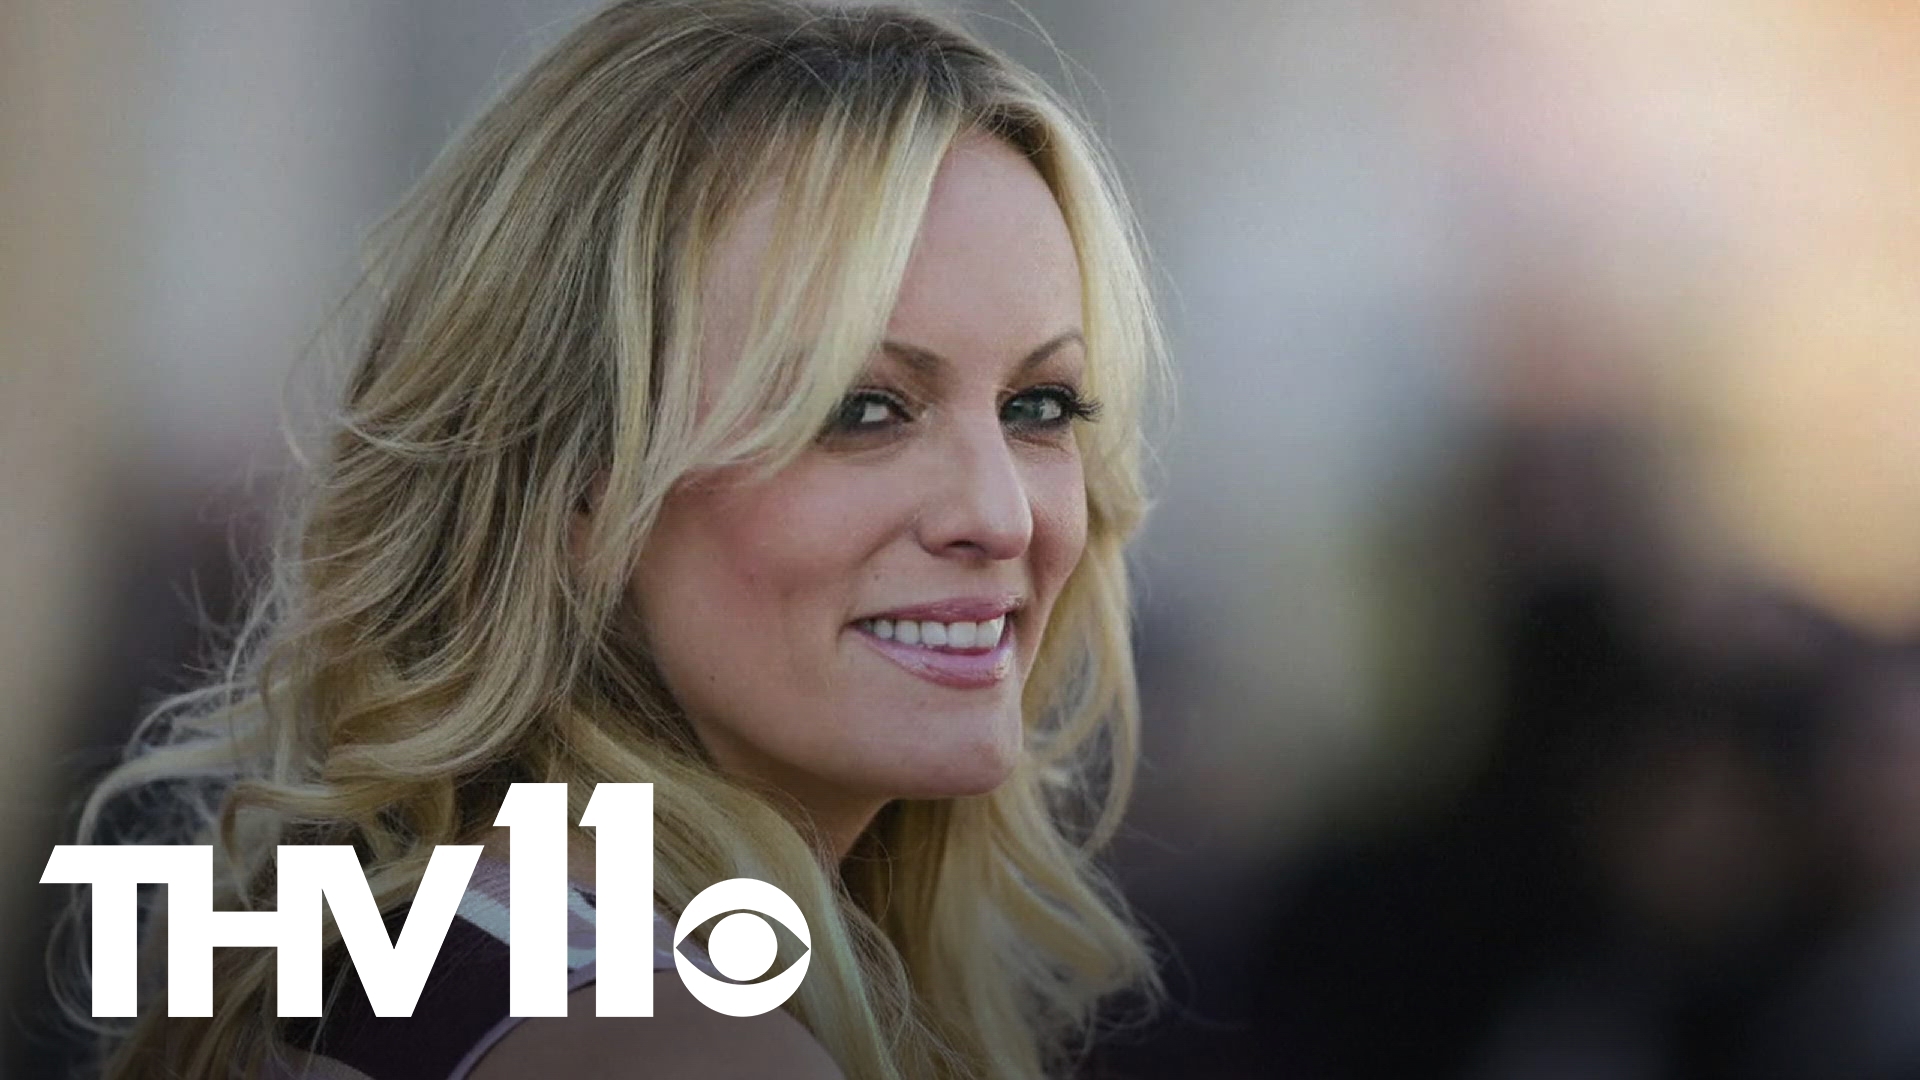 Stormy Daniels, the woman at the center of Donald Trump's criminal trial in New York, took the witness stand on Tuesday.